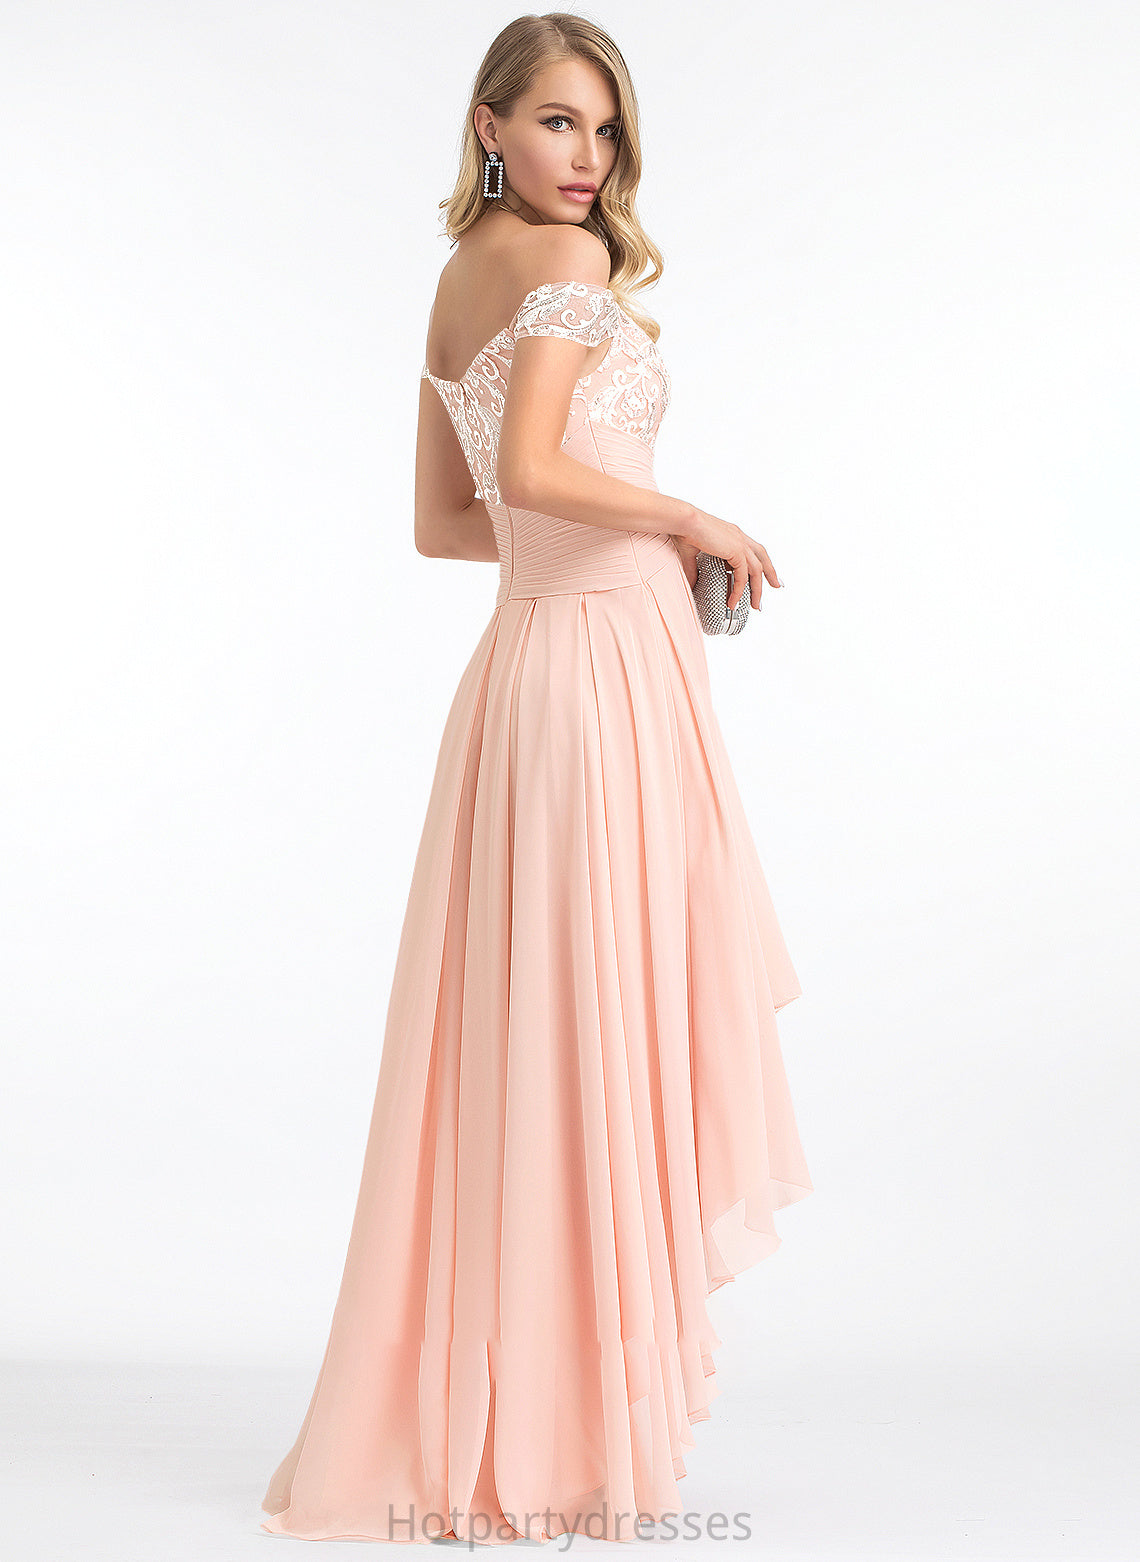 Beatrice Off-the-Shoulder Asymmetrical Dress Sequins Wedding Dresses With A-Line Wedding Chiffon